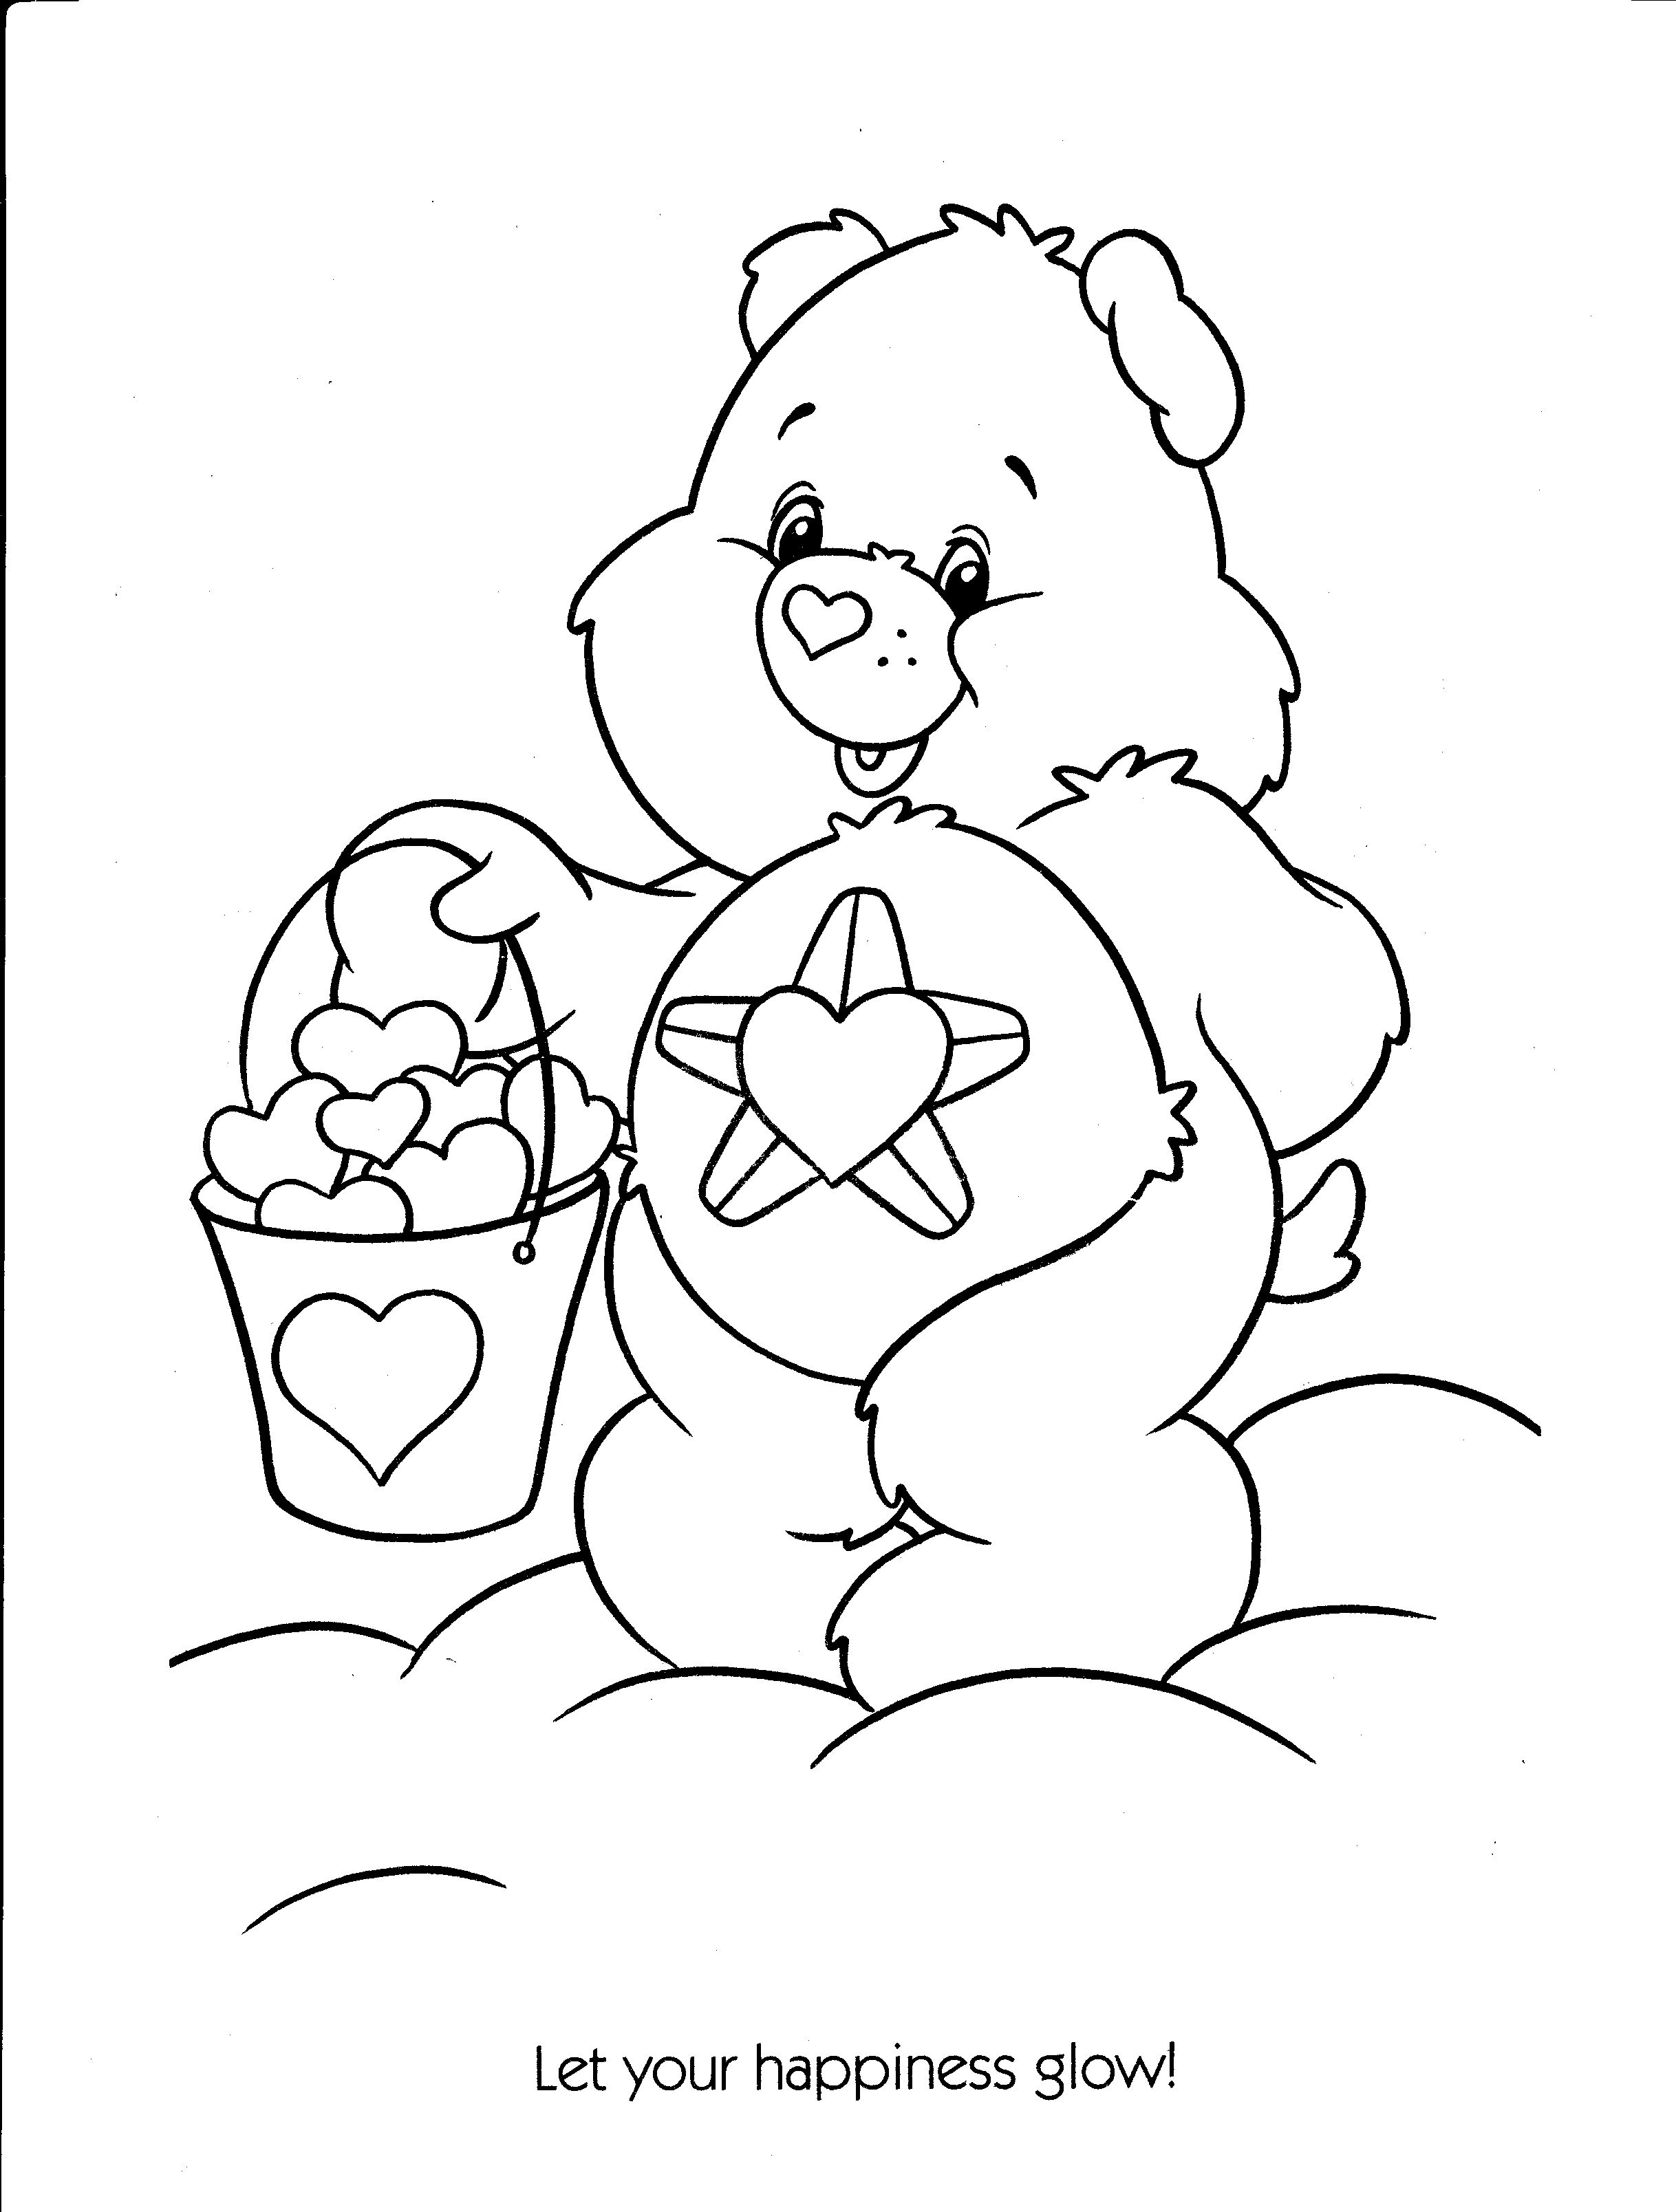 Delight in the joyful world of ce be coloring page